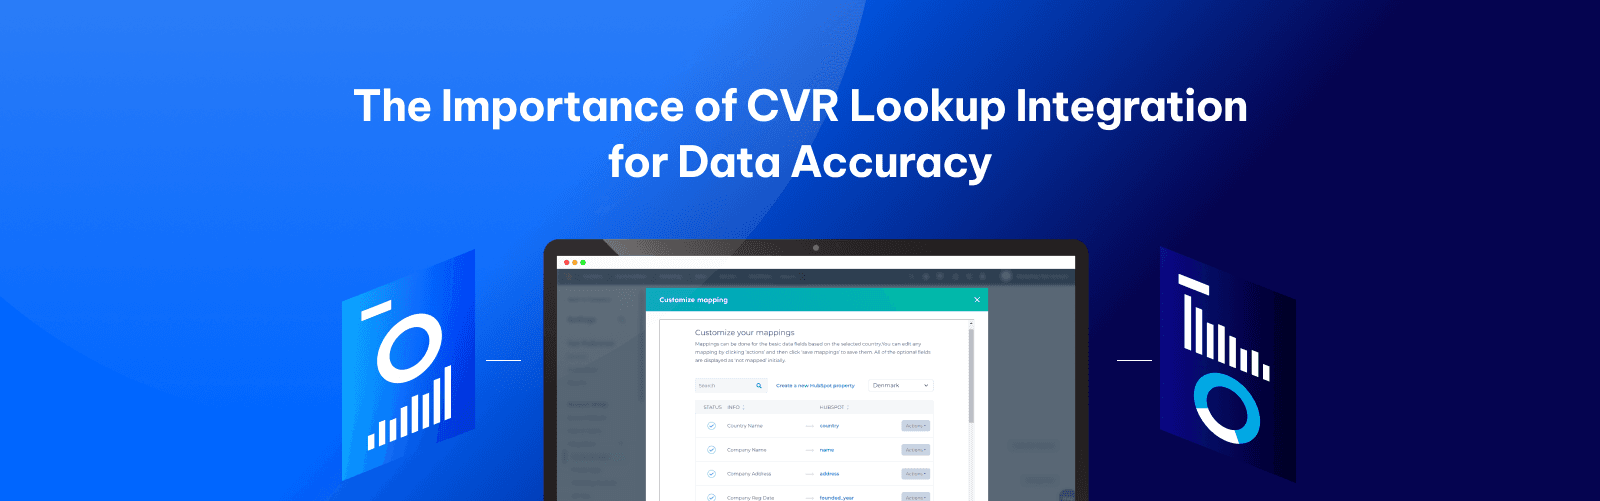 The Importance of CVR Lookup Integration for Data Accuracy